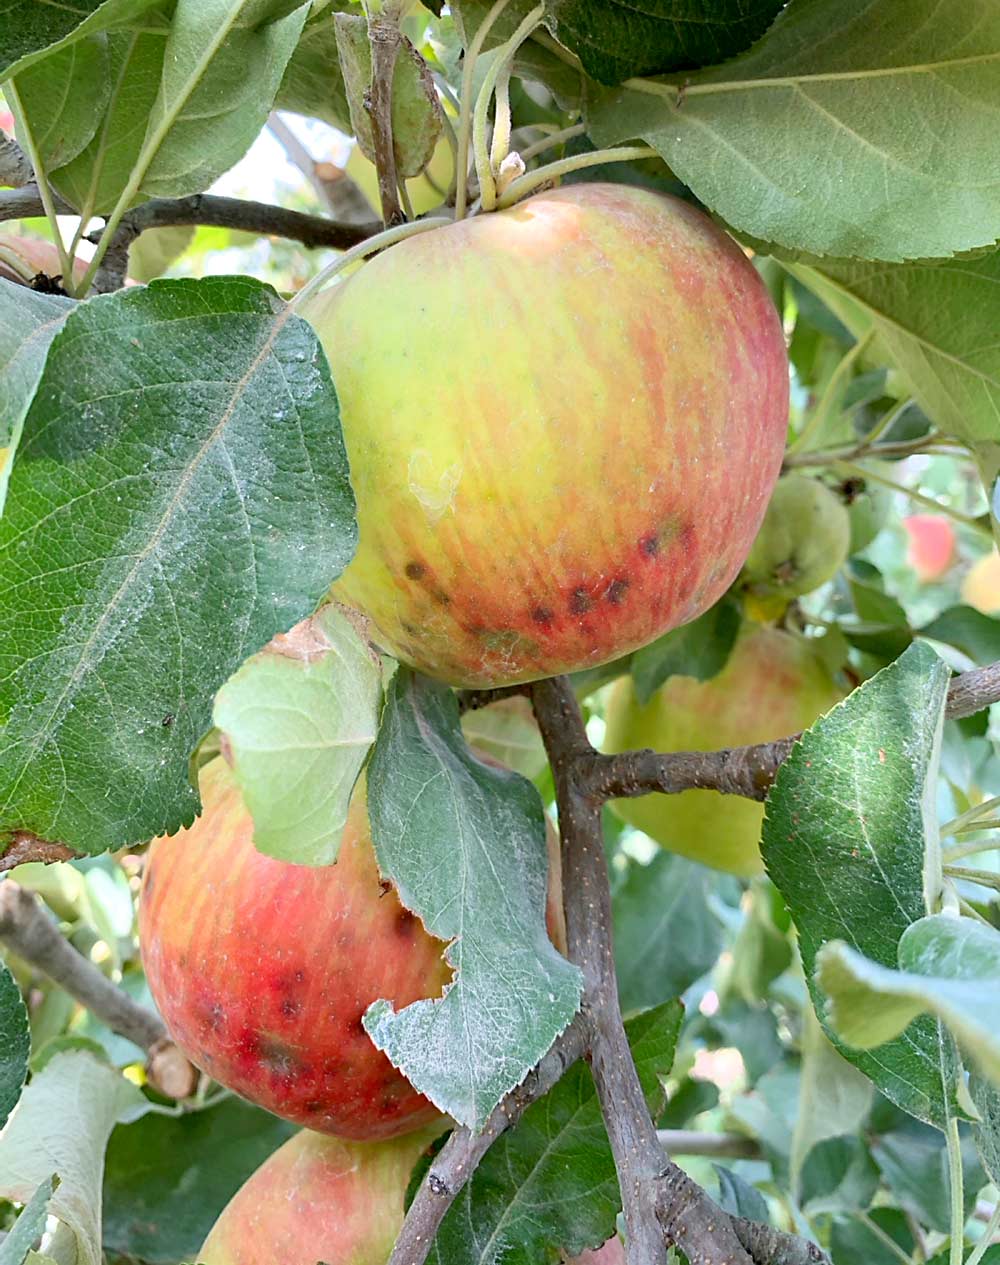 A one-year study by Bernardita Sallato of Washington State University found that foliar sprays and soil amendments may do little to reduce the incidence of bitter pit, one of Honeycrisp growers’ most vexing problems. (Courtesy Bernardita Sallato/Washington State University)